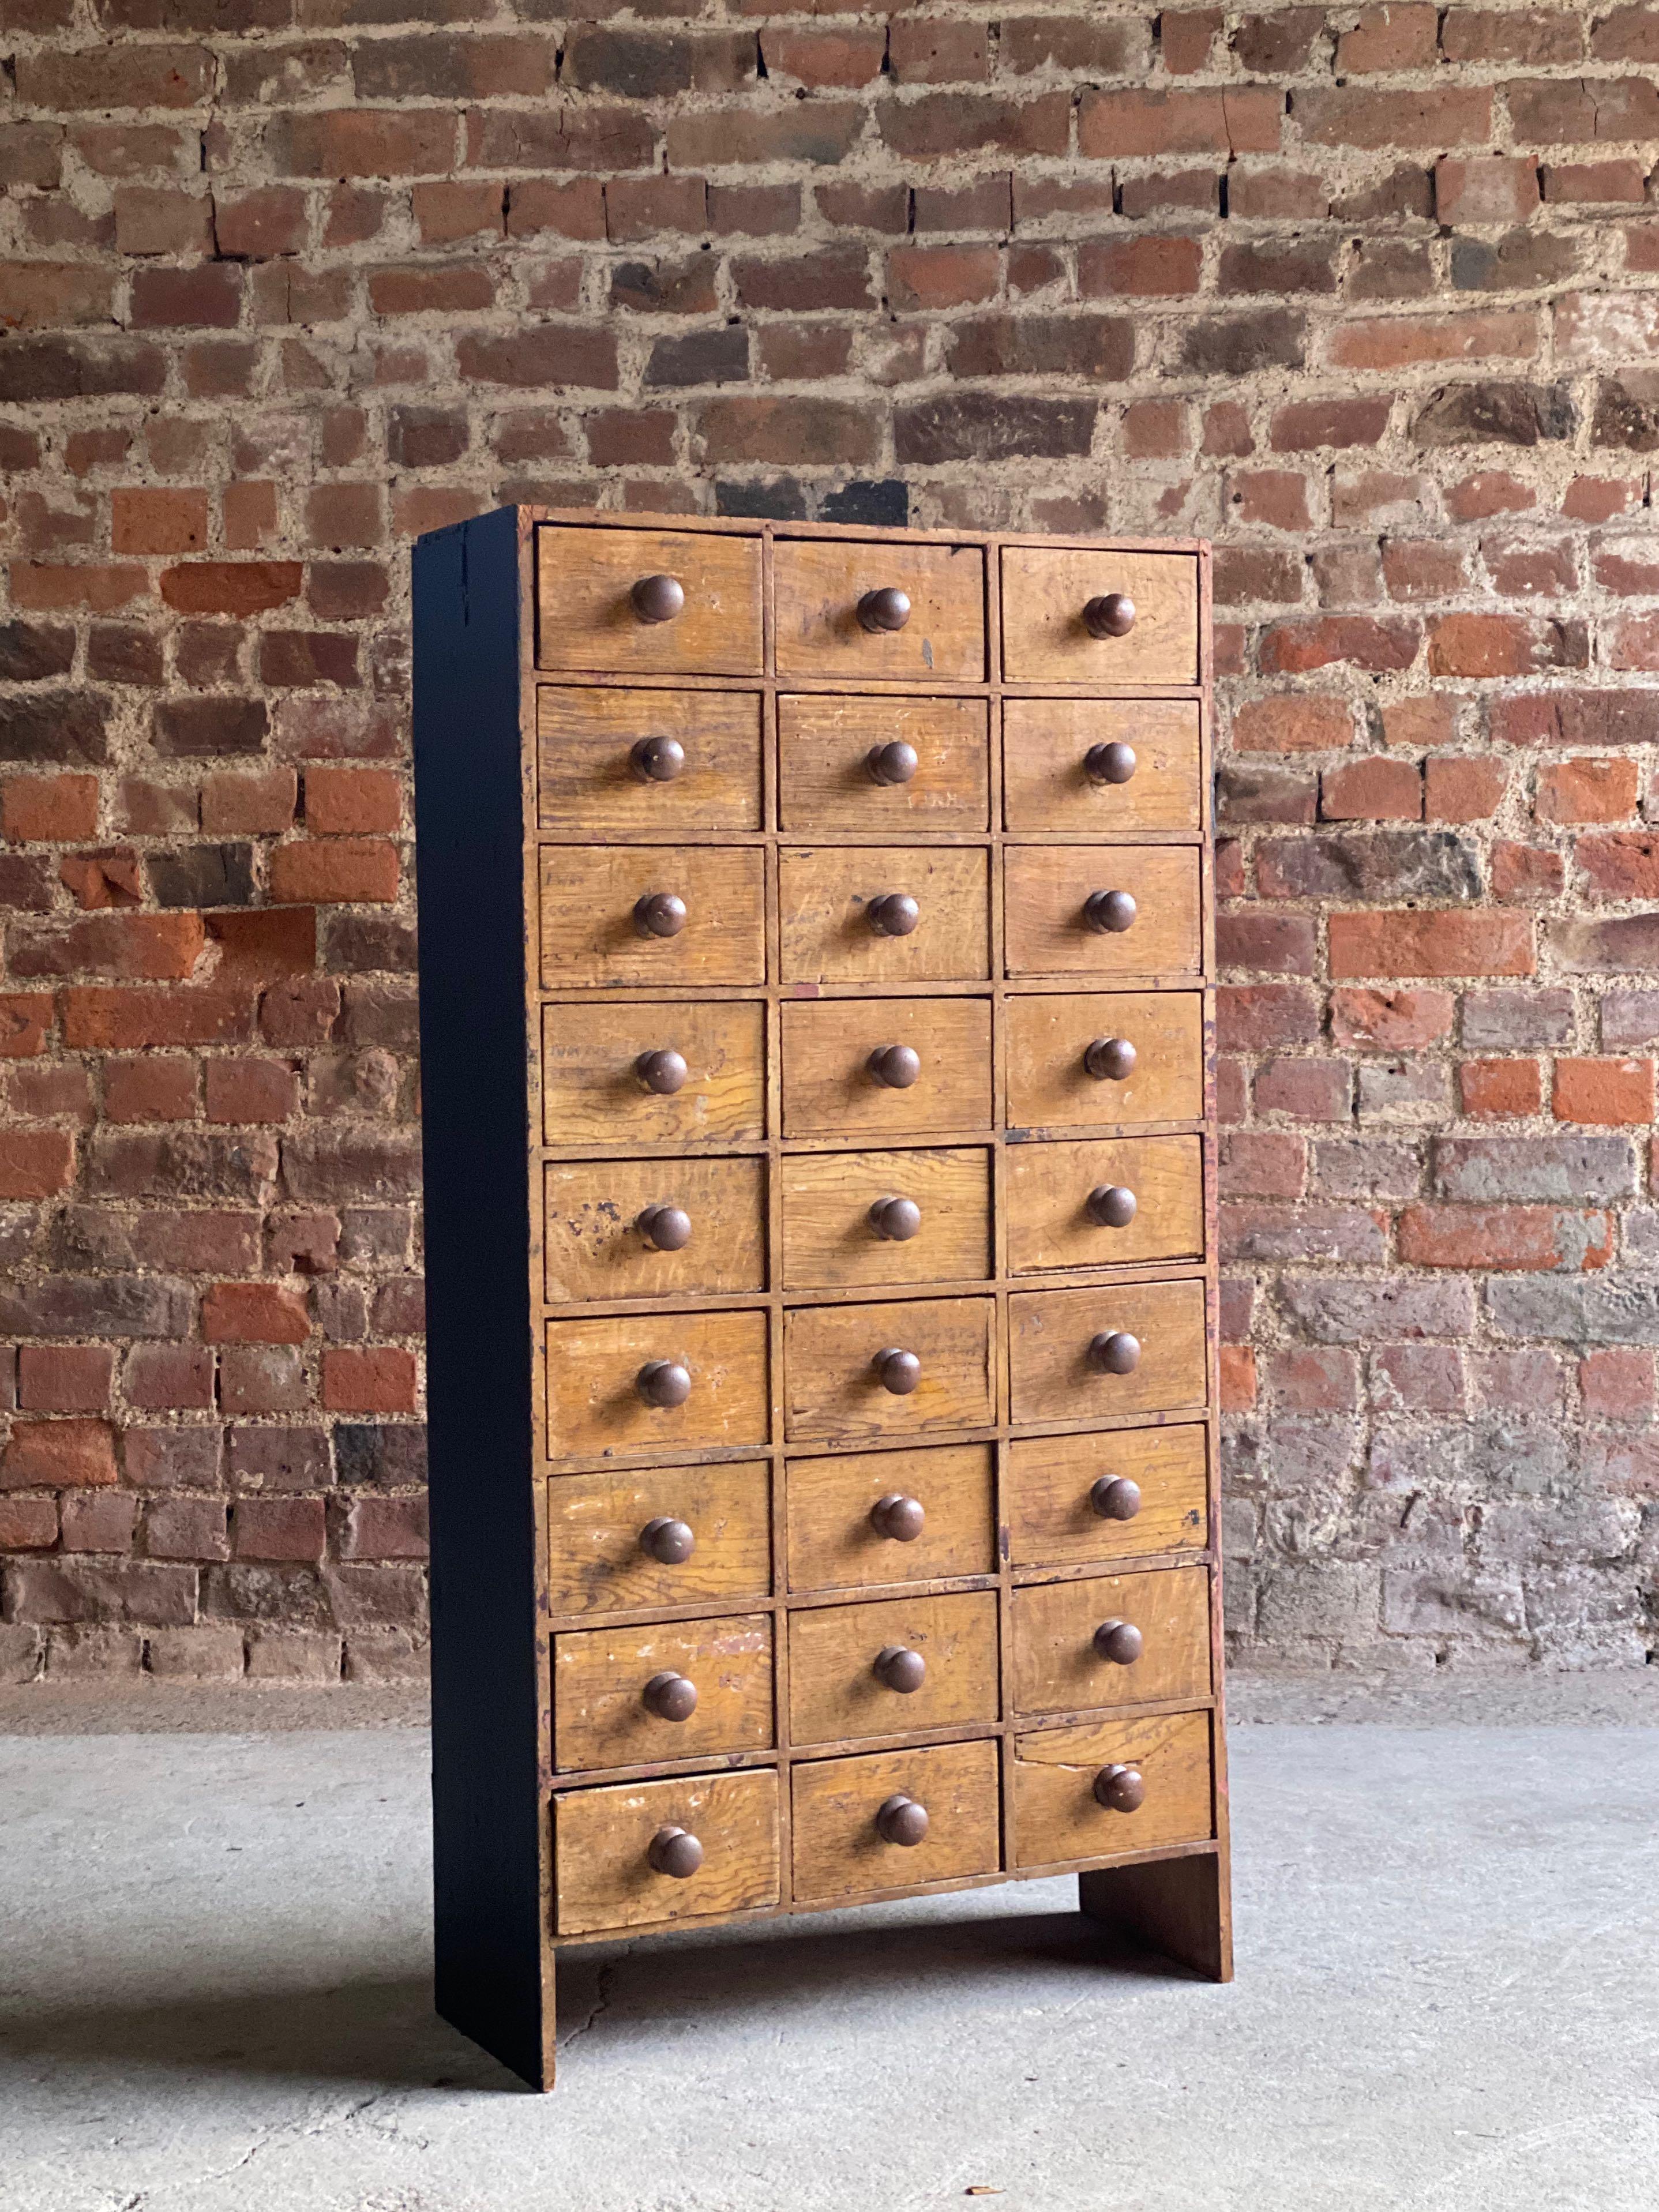 Small Haberdashery Industrial Engineers chest of drawers loft style, circa 1940s

We are is delighted to offer this beautiful aged and distressed 'Engineers' pine bank of twenty seven drawers, circa 1930s, seriously distressed throughout, twenty